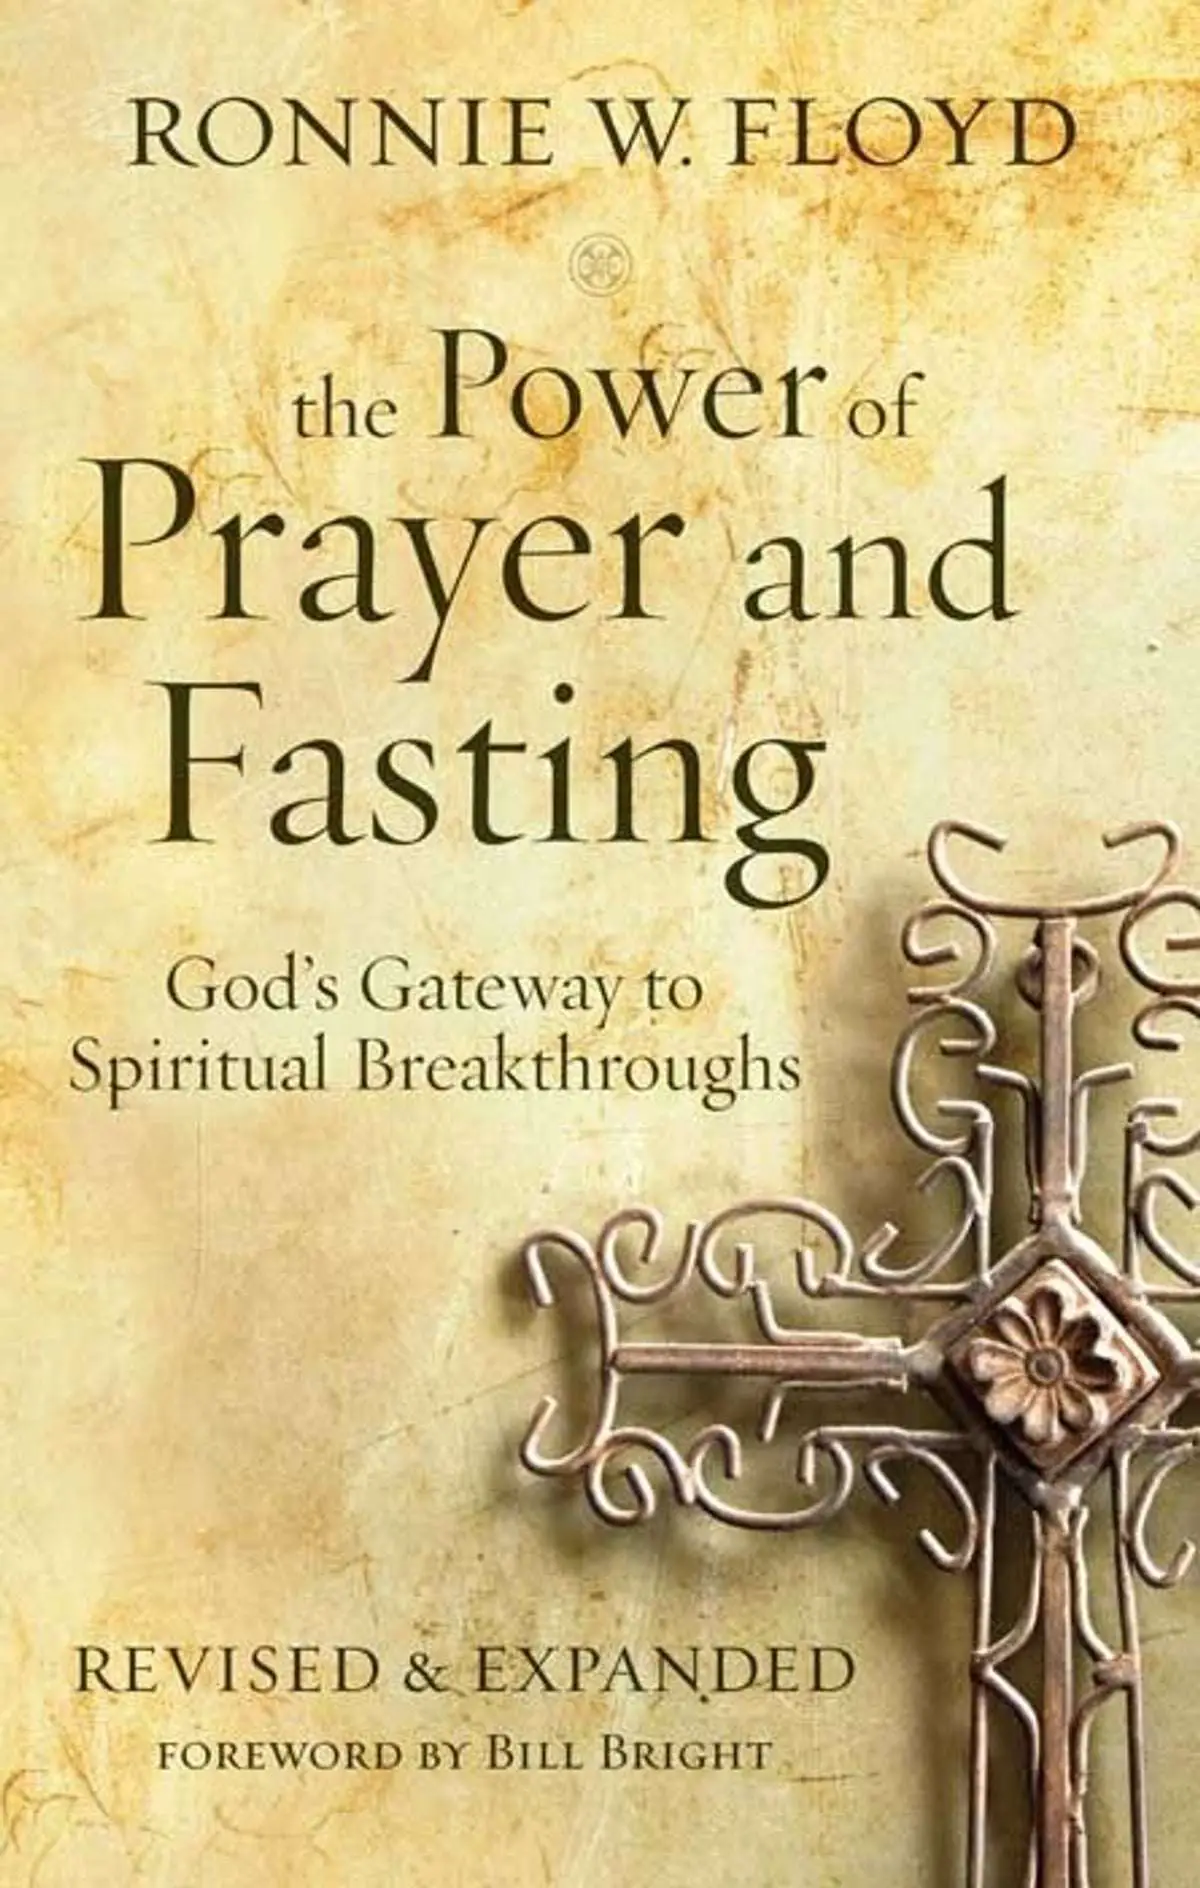 The Power of Prayer and Fasting eBook by Ronnie Floyd